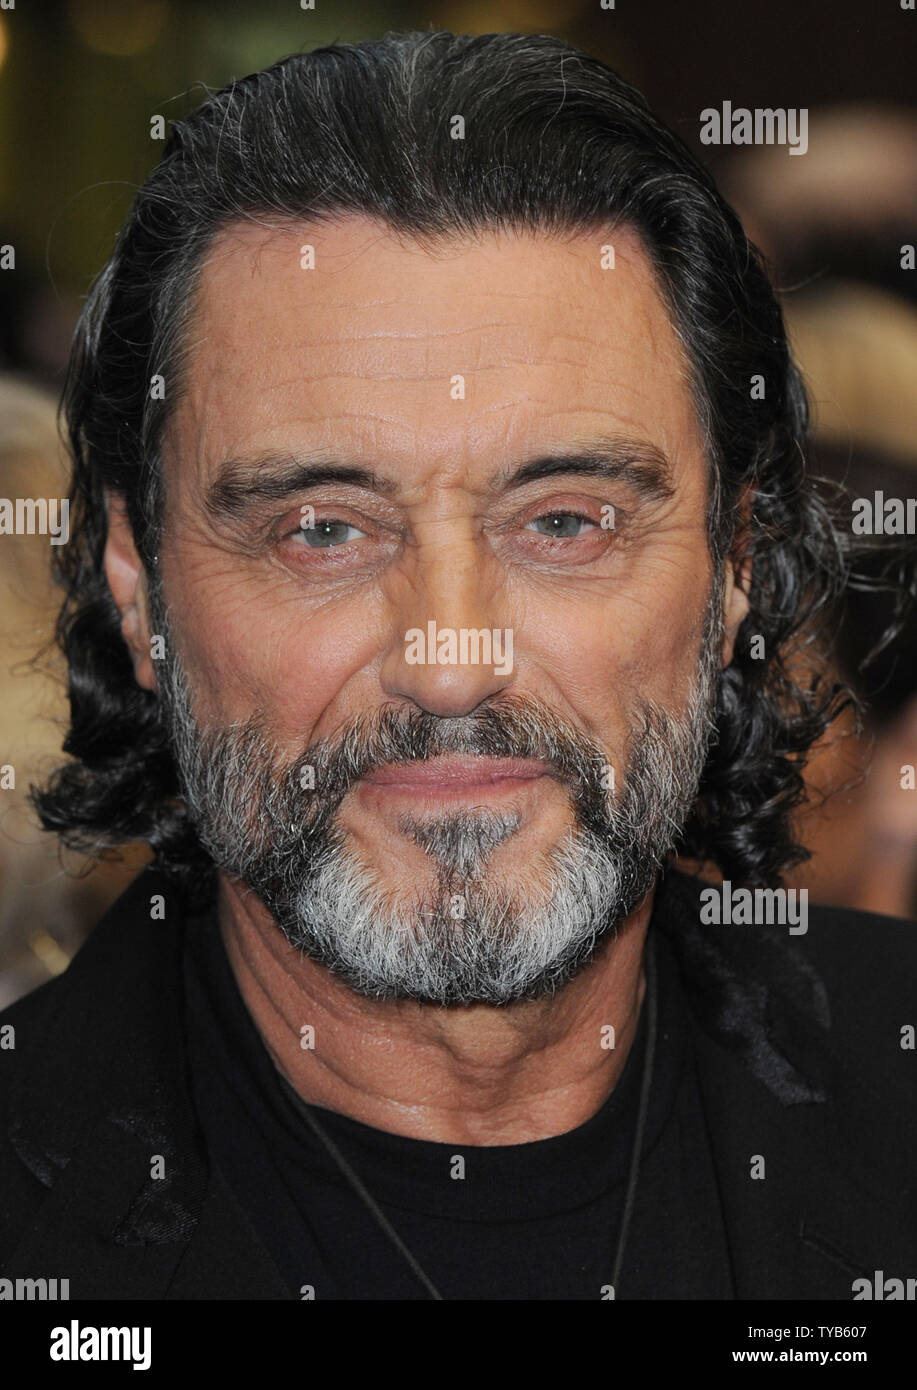 British actor Ian McShane attends the premiere of 'Pirates Of The Caribbean: On Stranger Tides' at Vue, Westfield in London on May 12, 2011.     UPI/Rune Hellestad Stock Photo